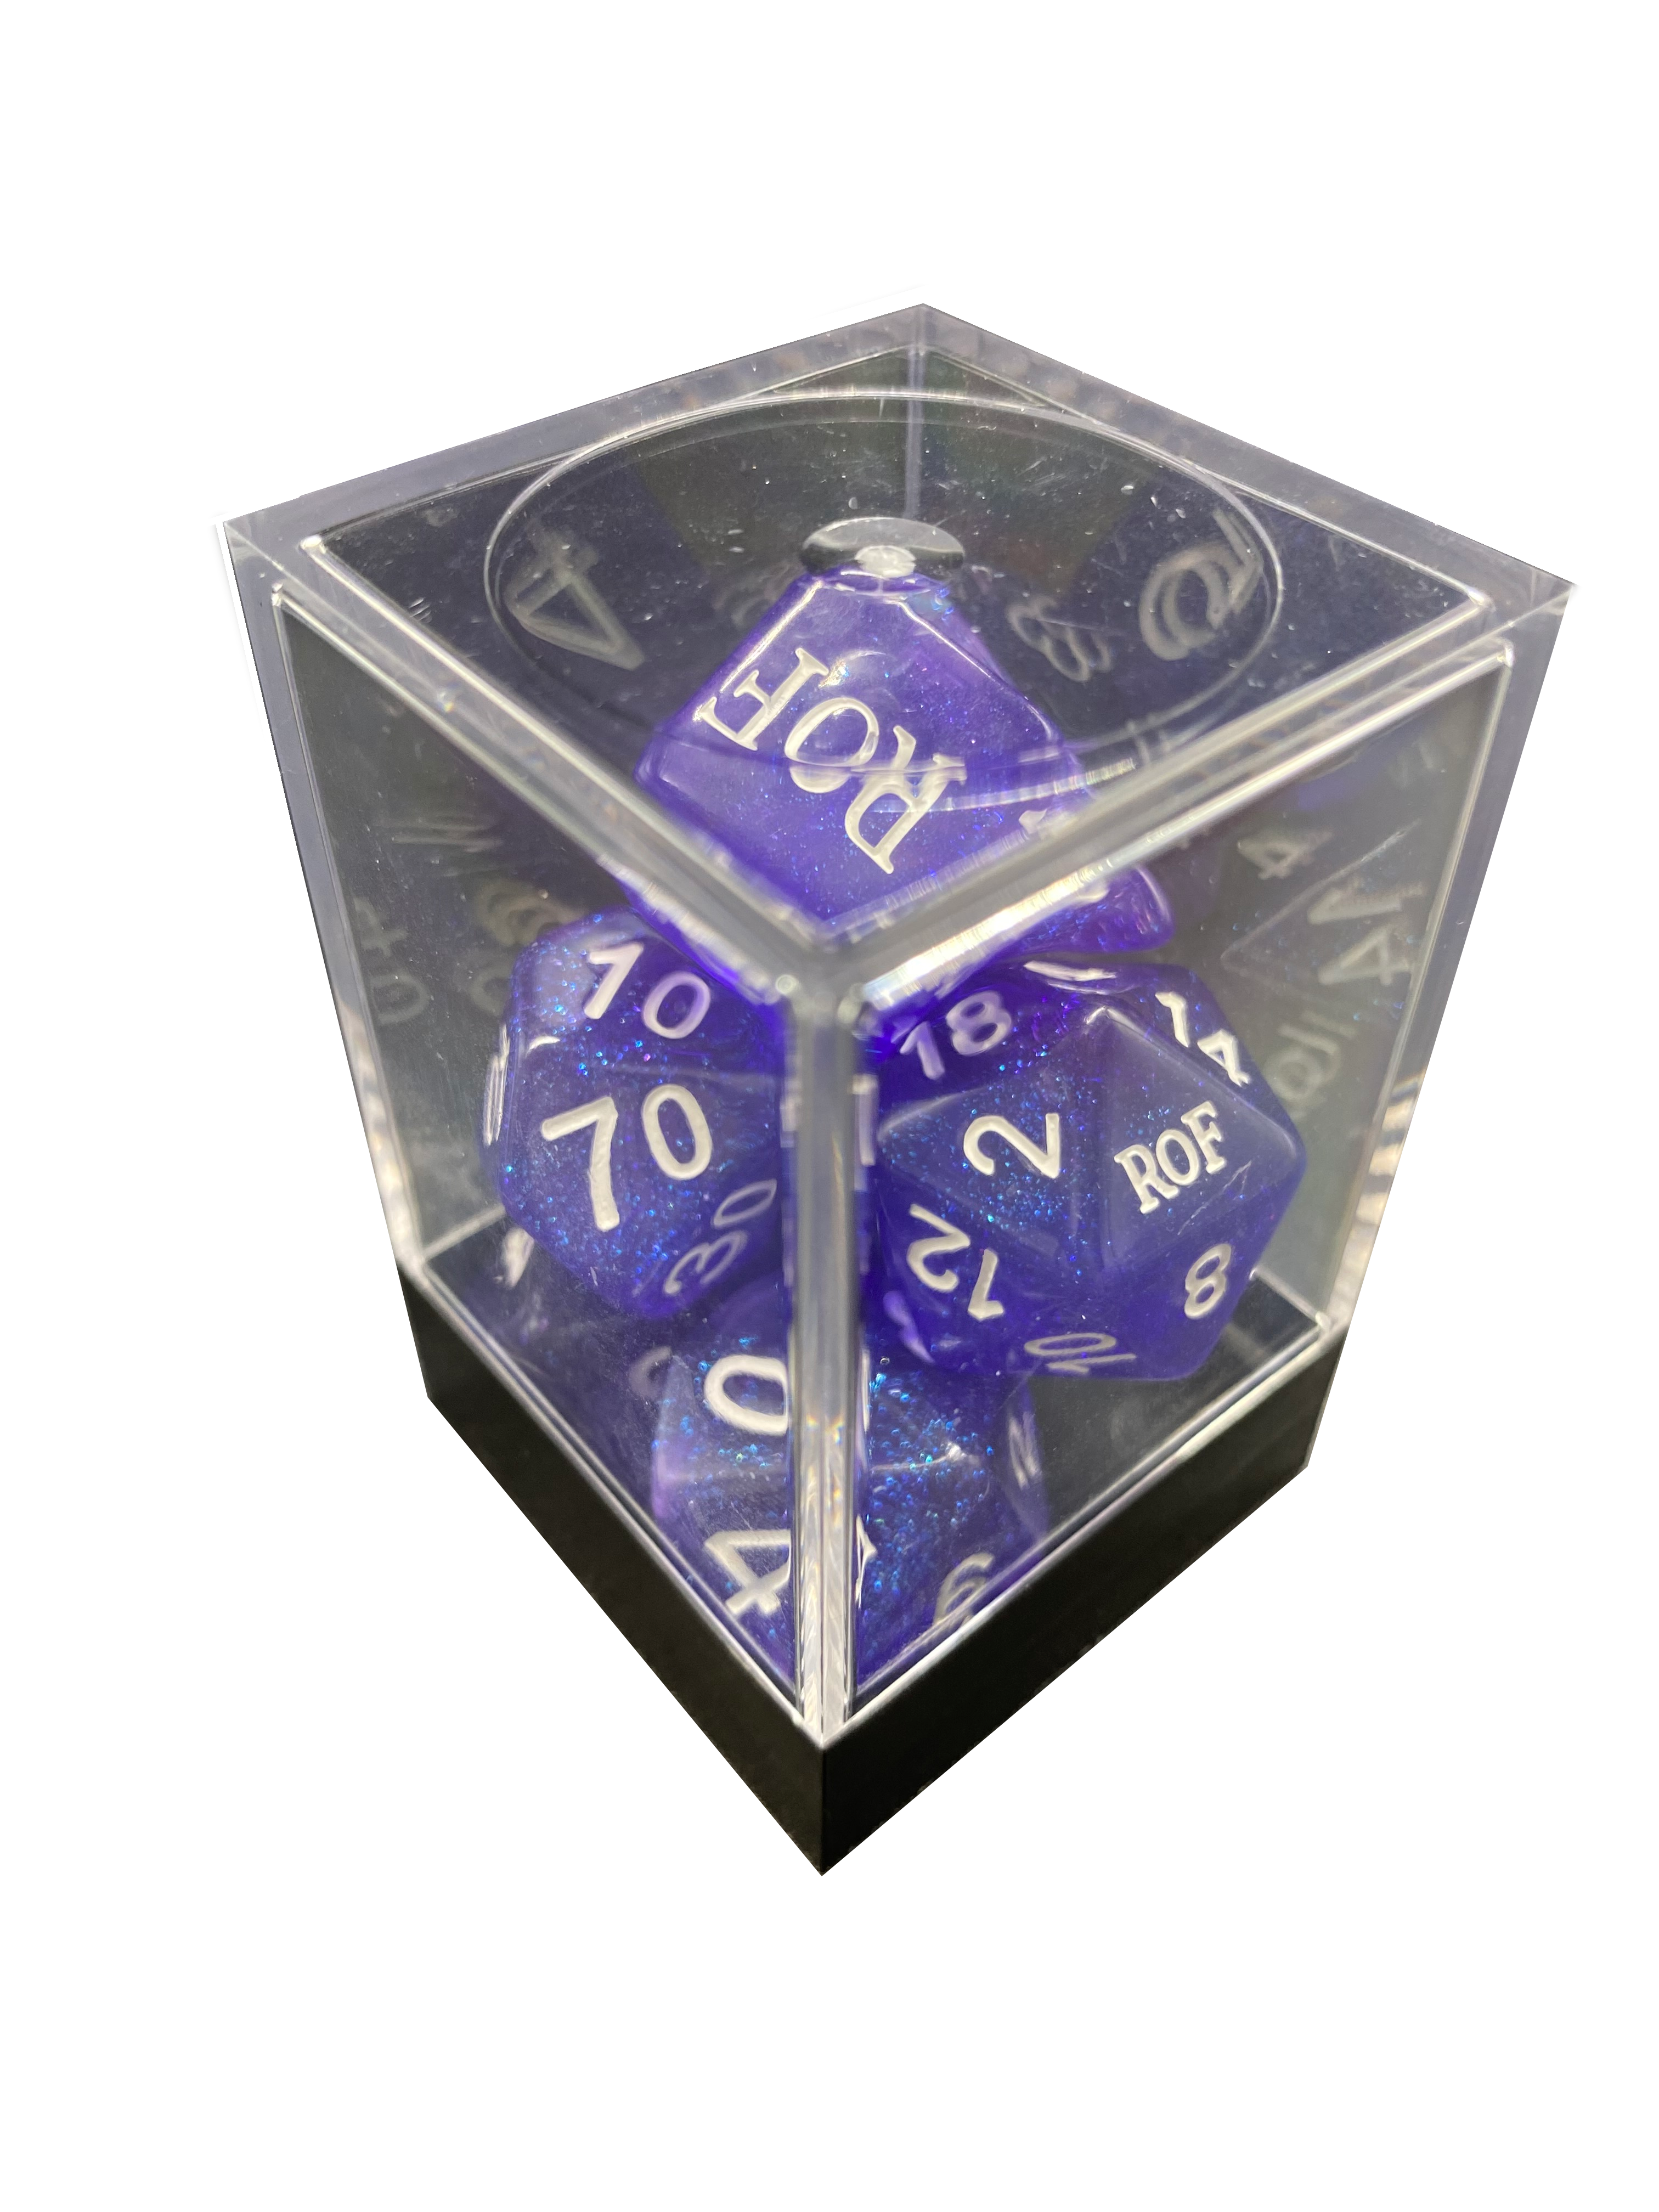 Role of Fate - Dice and Acrylic Box